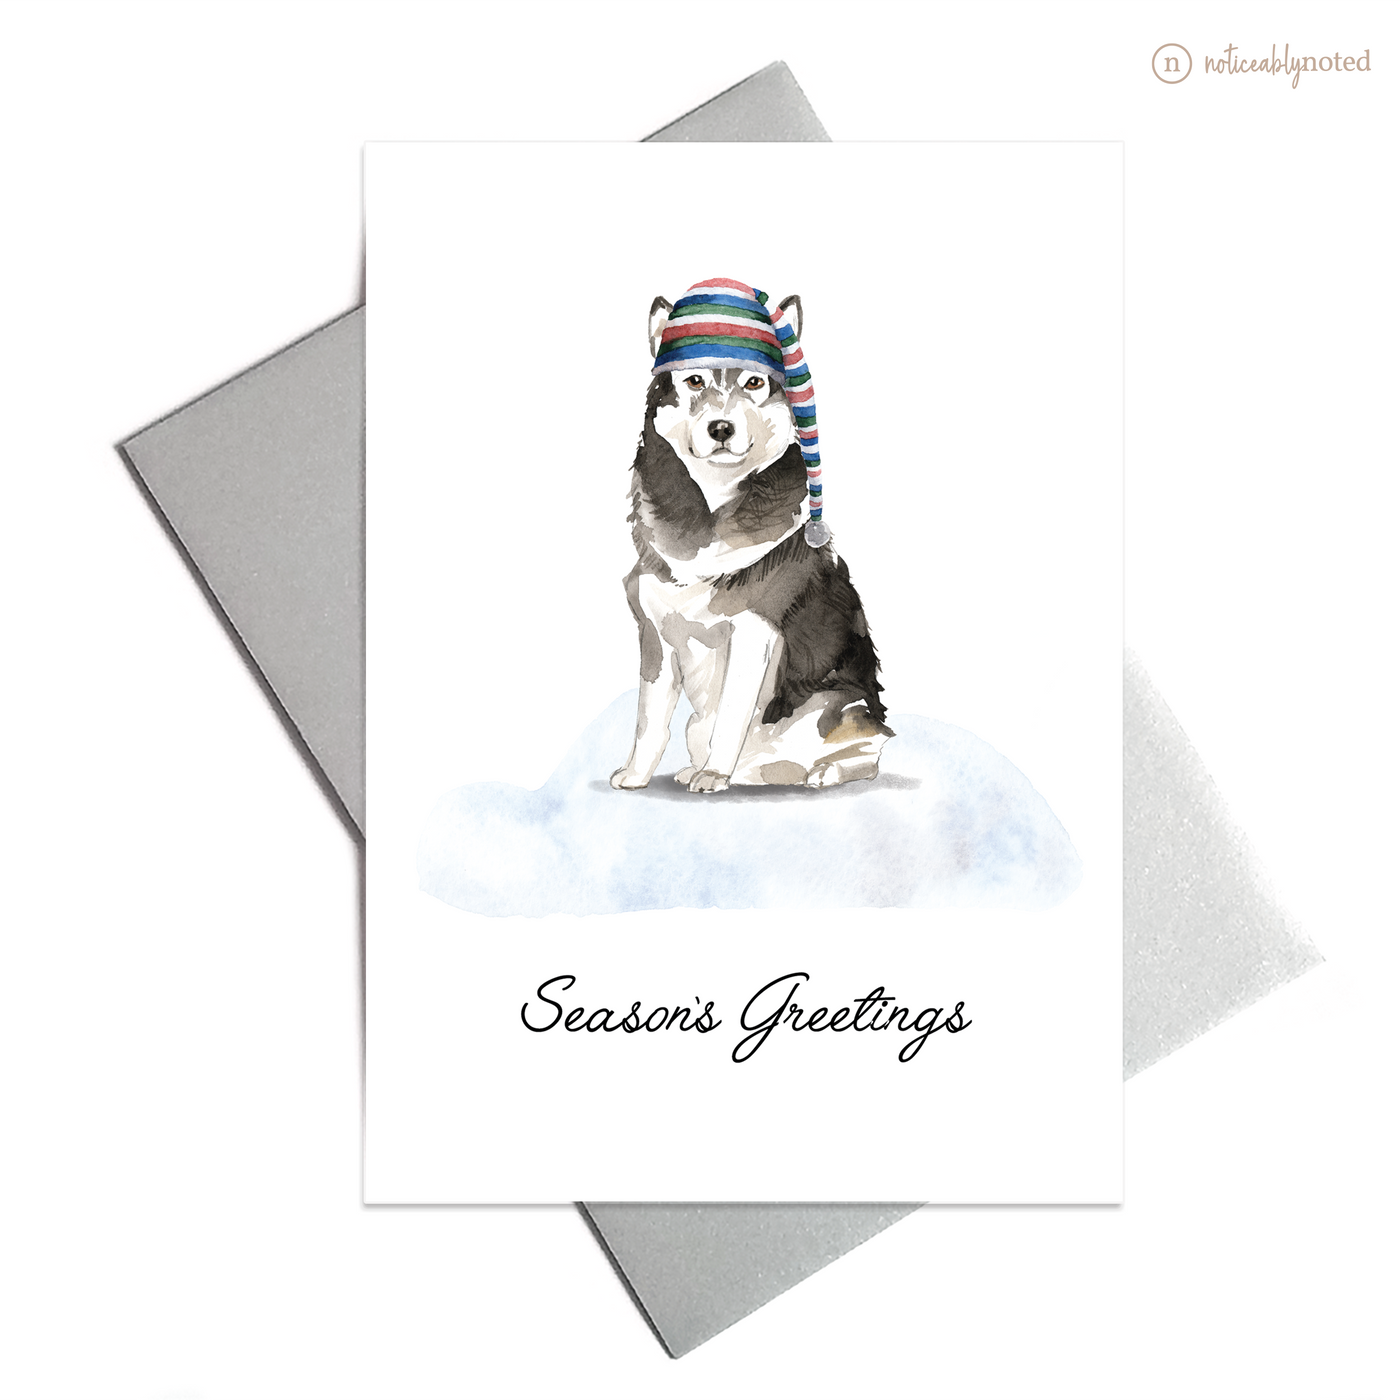 Malamute Dog Holiday Card | Noticeably Noted